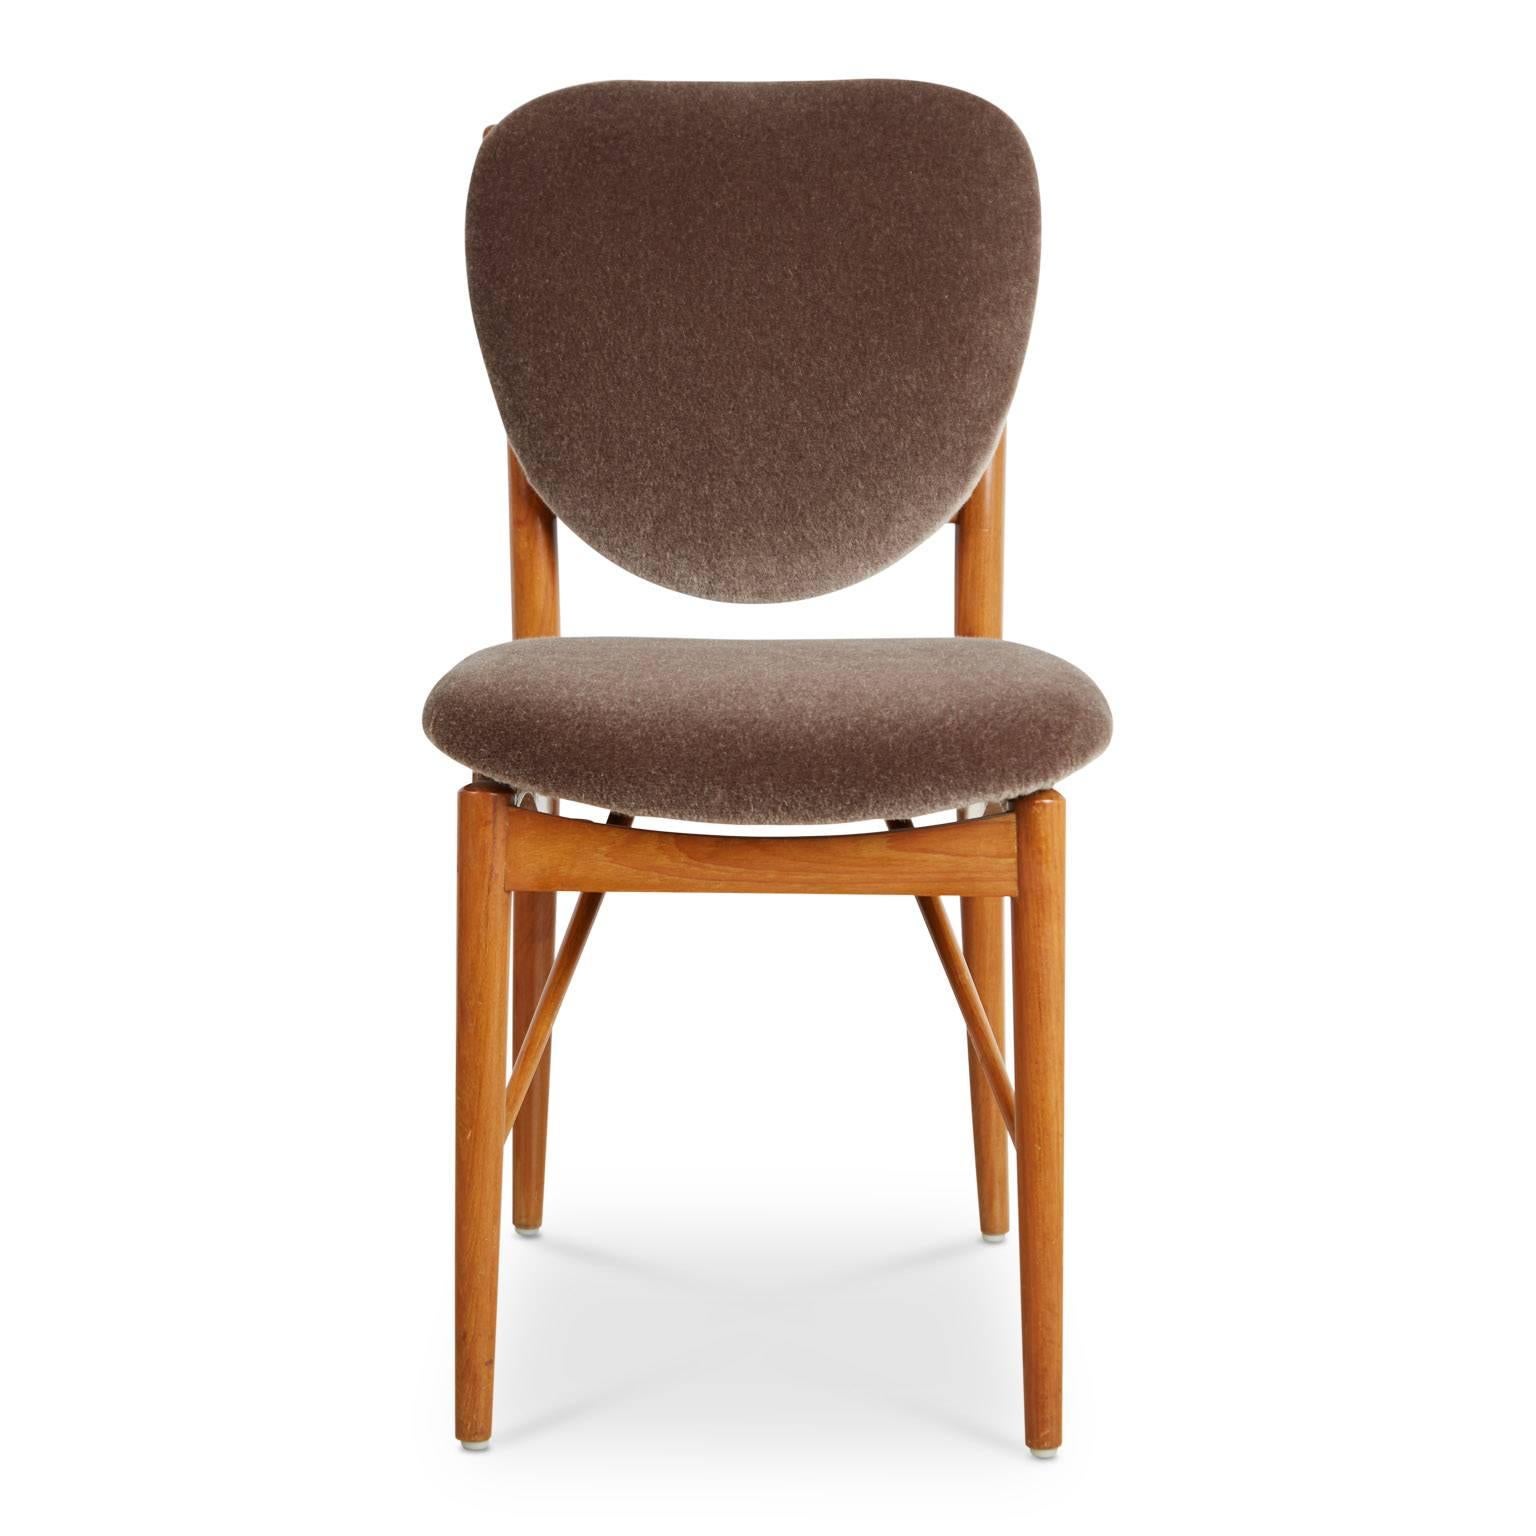 These Finn Juhl, and attributed to Bovirke, dining side chairs are gleaming with personality, character and charm and are an excellent example of the Danish architect and designer's work. 

The chairs feature teak frames consisting of clean lines